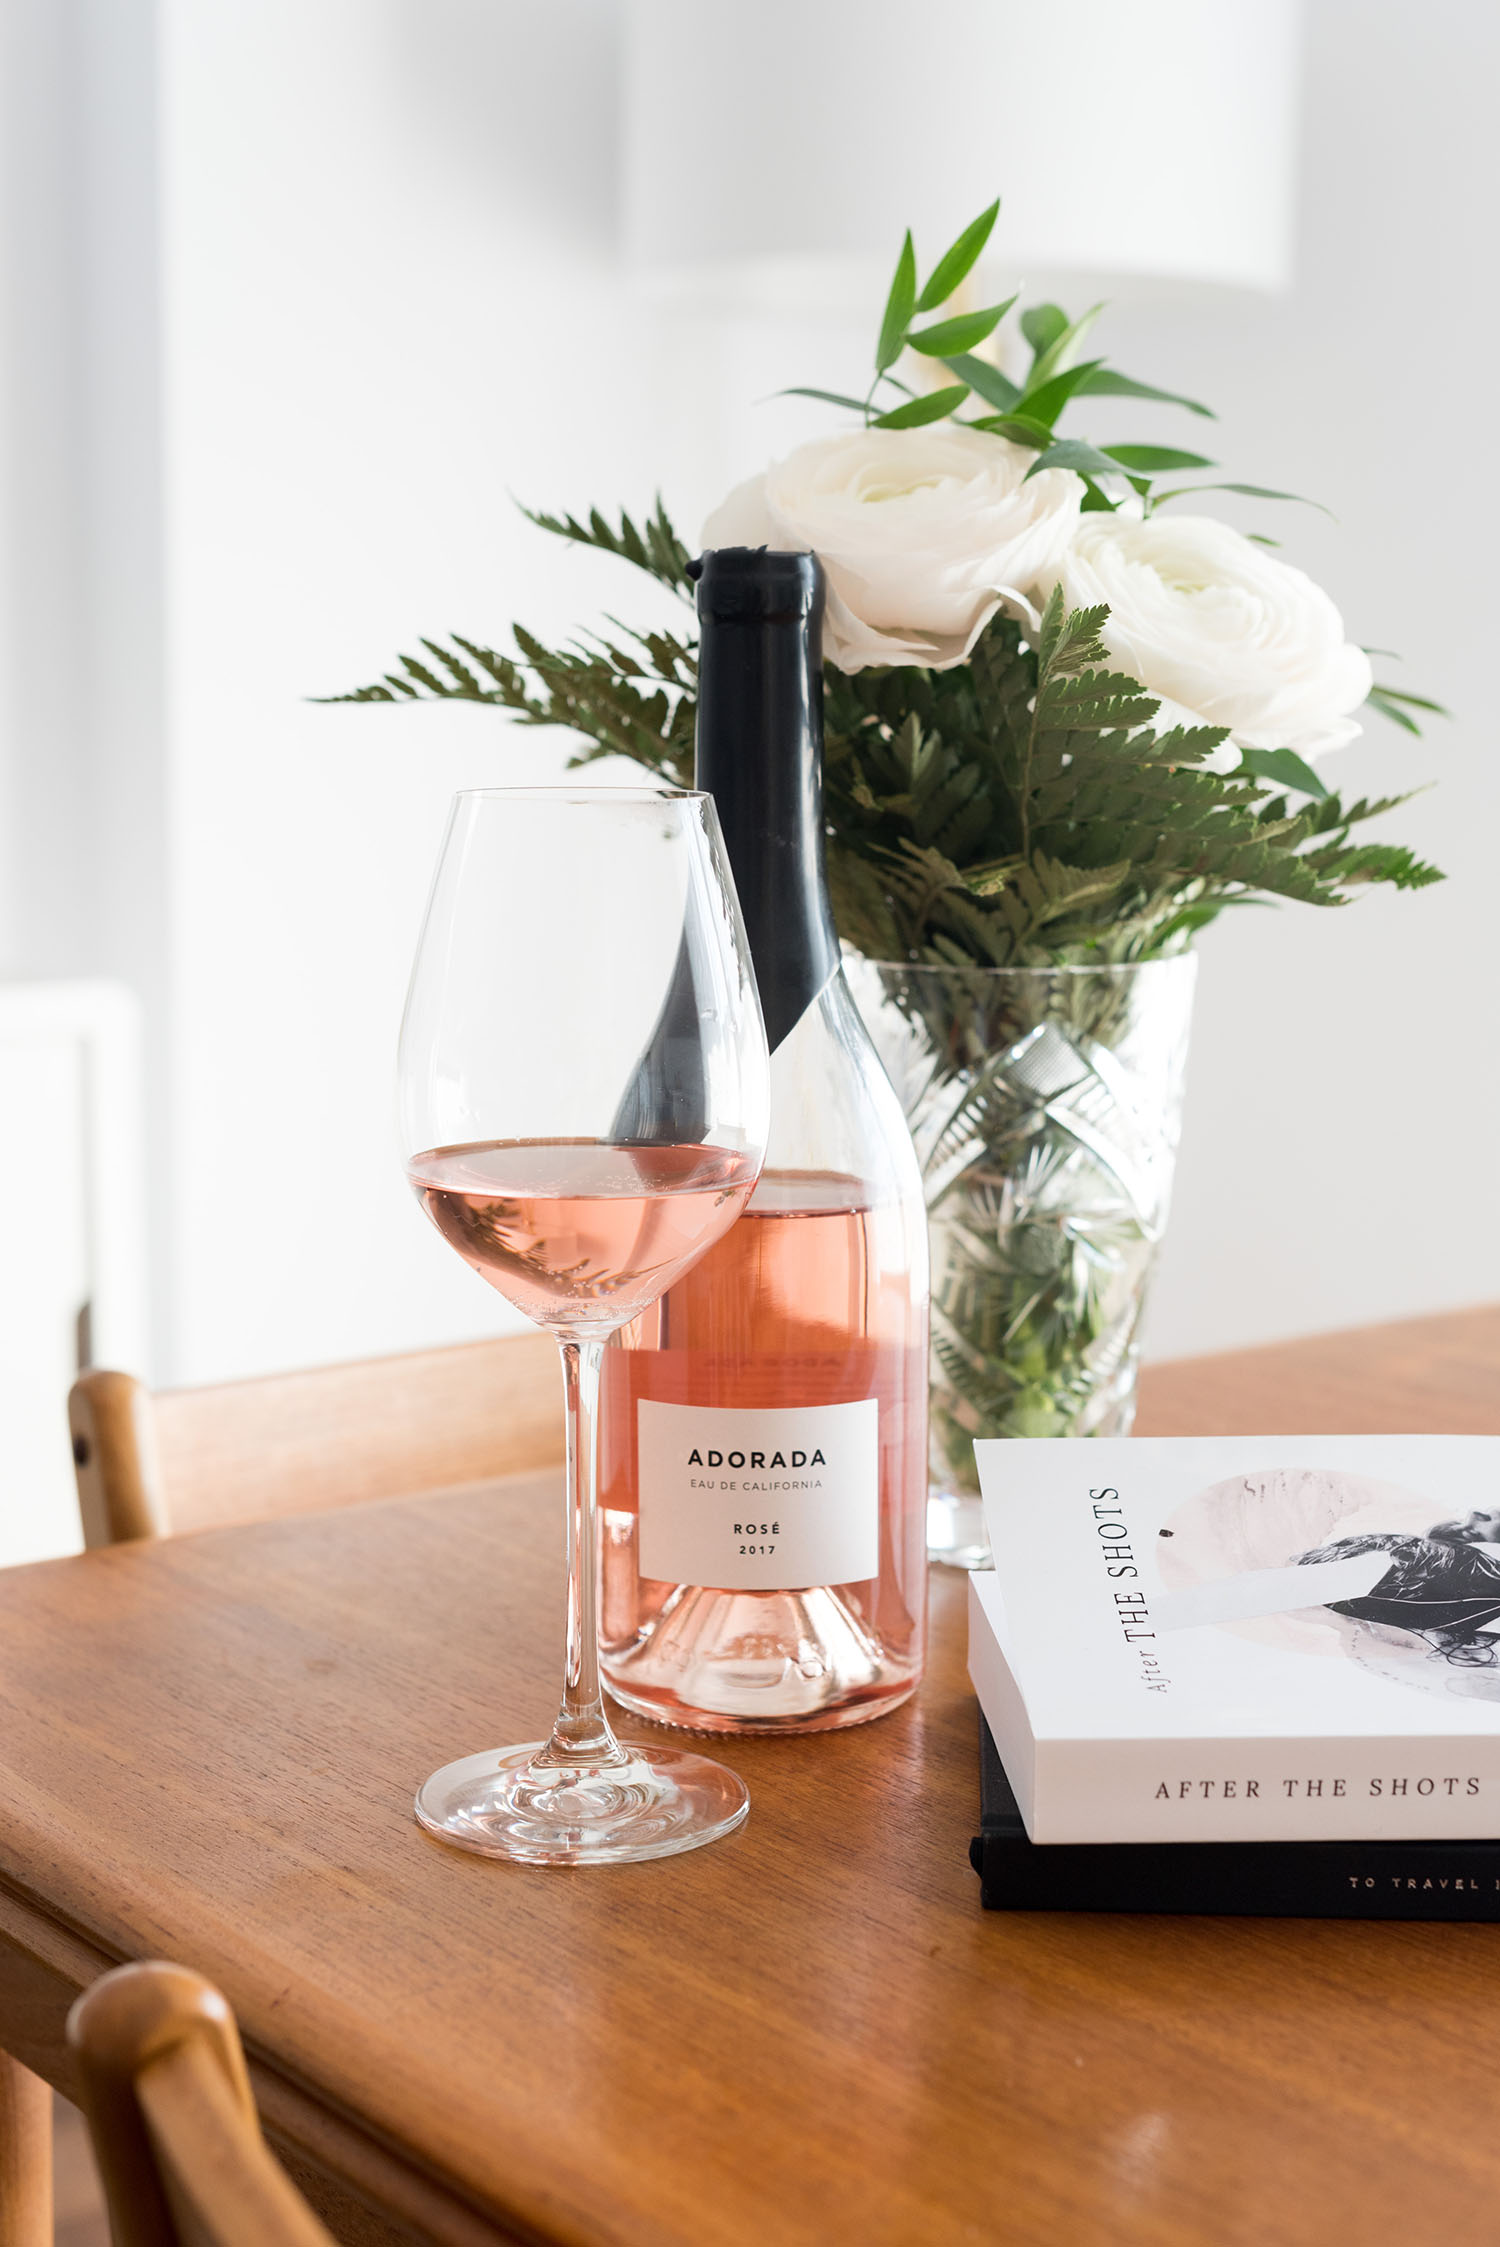 Adored rose wine and a copy of After the Shots, a novel written by top Canadian lifestyle blogger Cee Fardoe of Coco & Vera